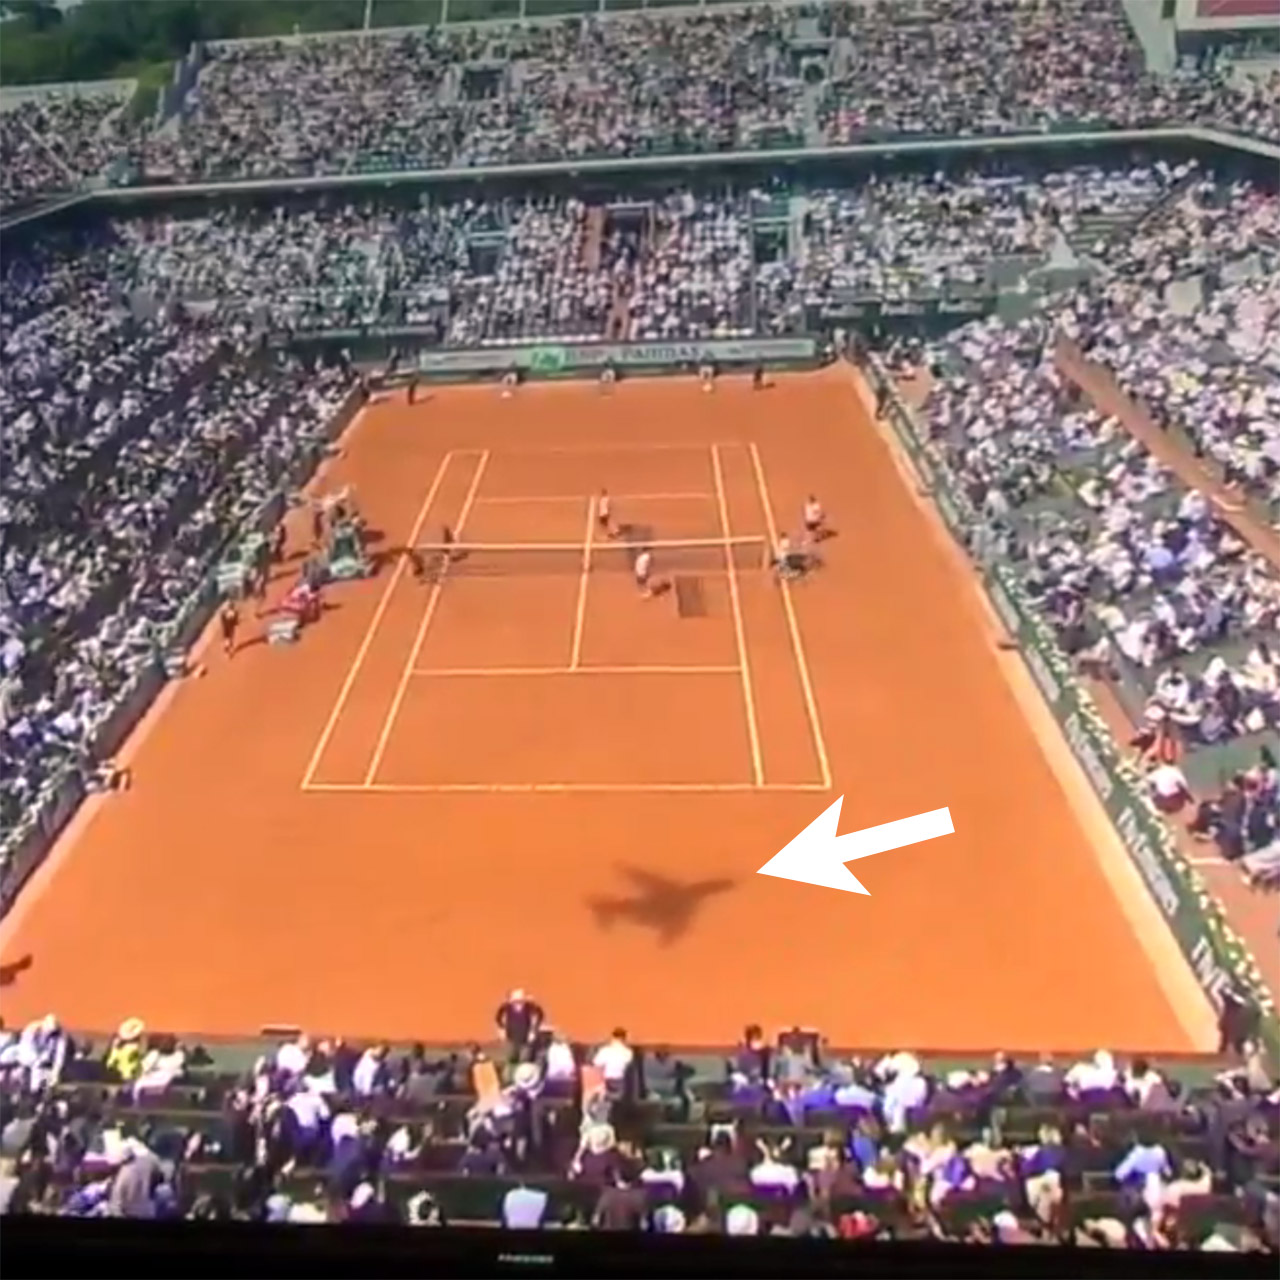 Backward flying plane appears during Serena Williams vs Sloane Stephens match at French Open